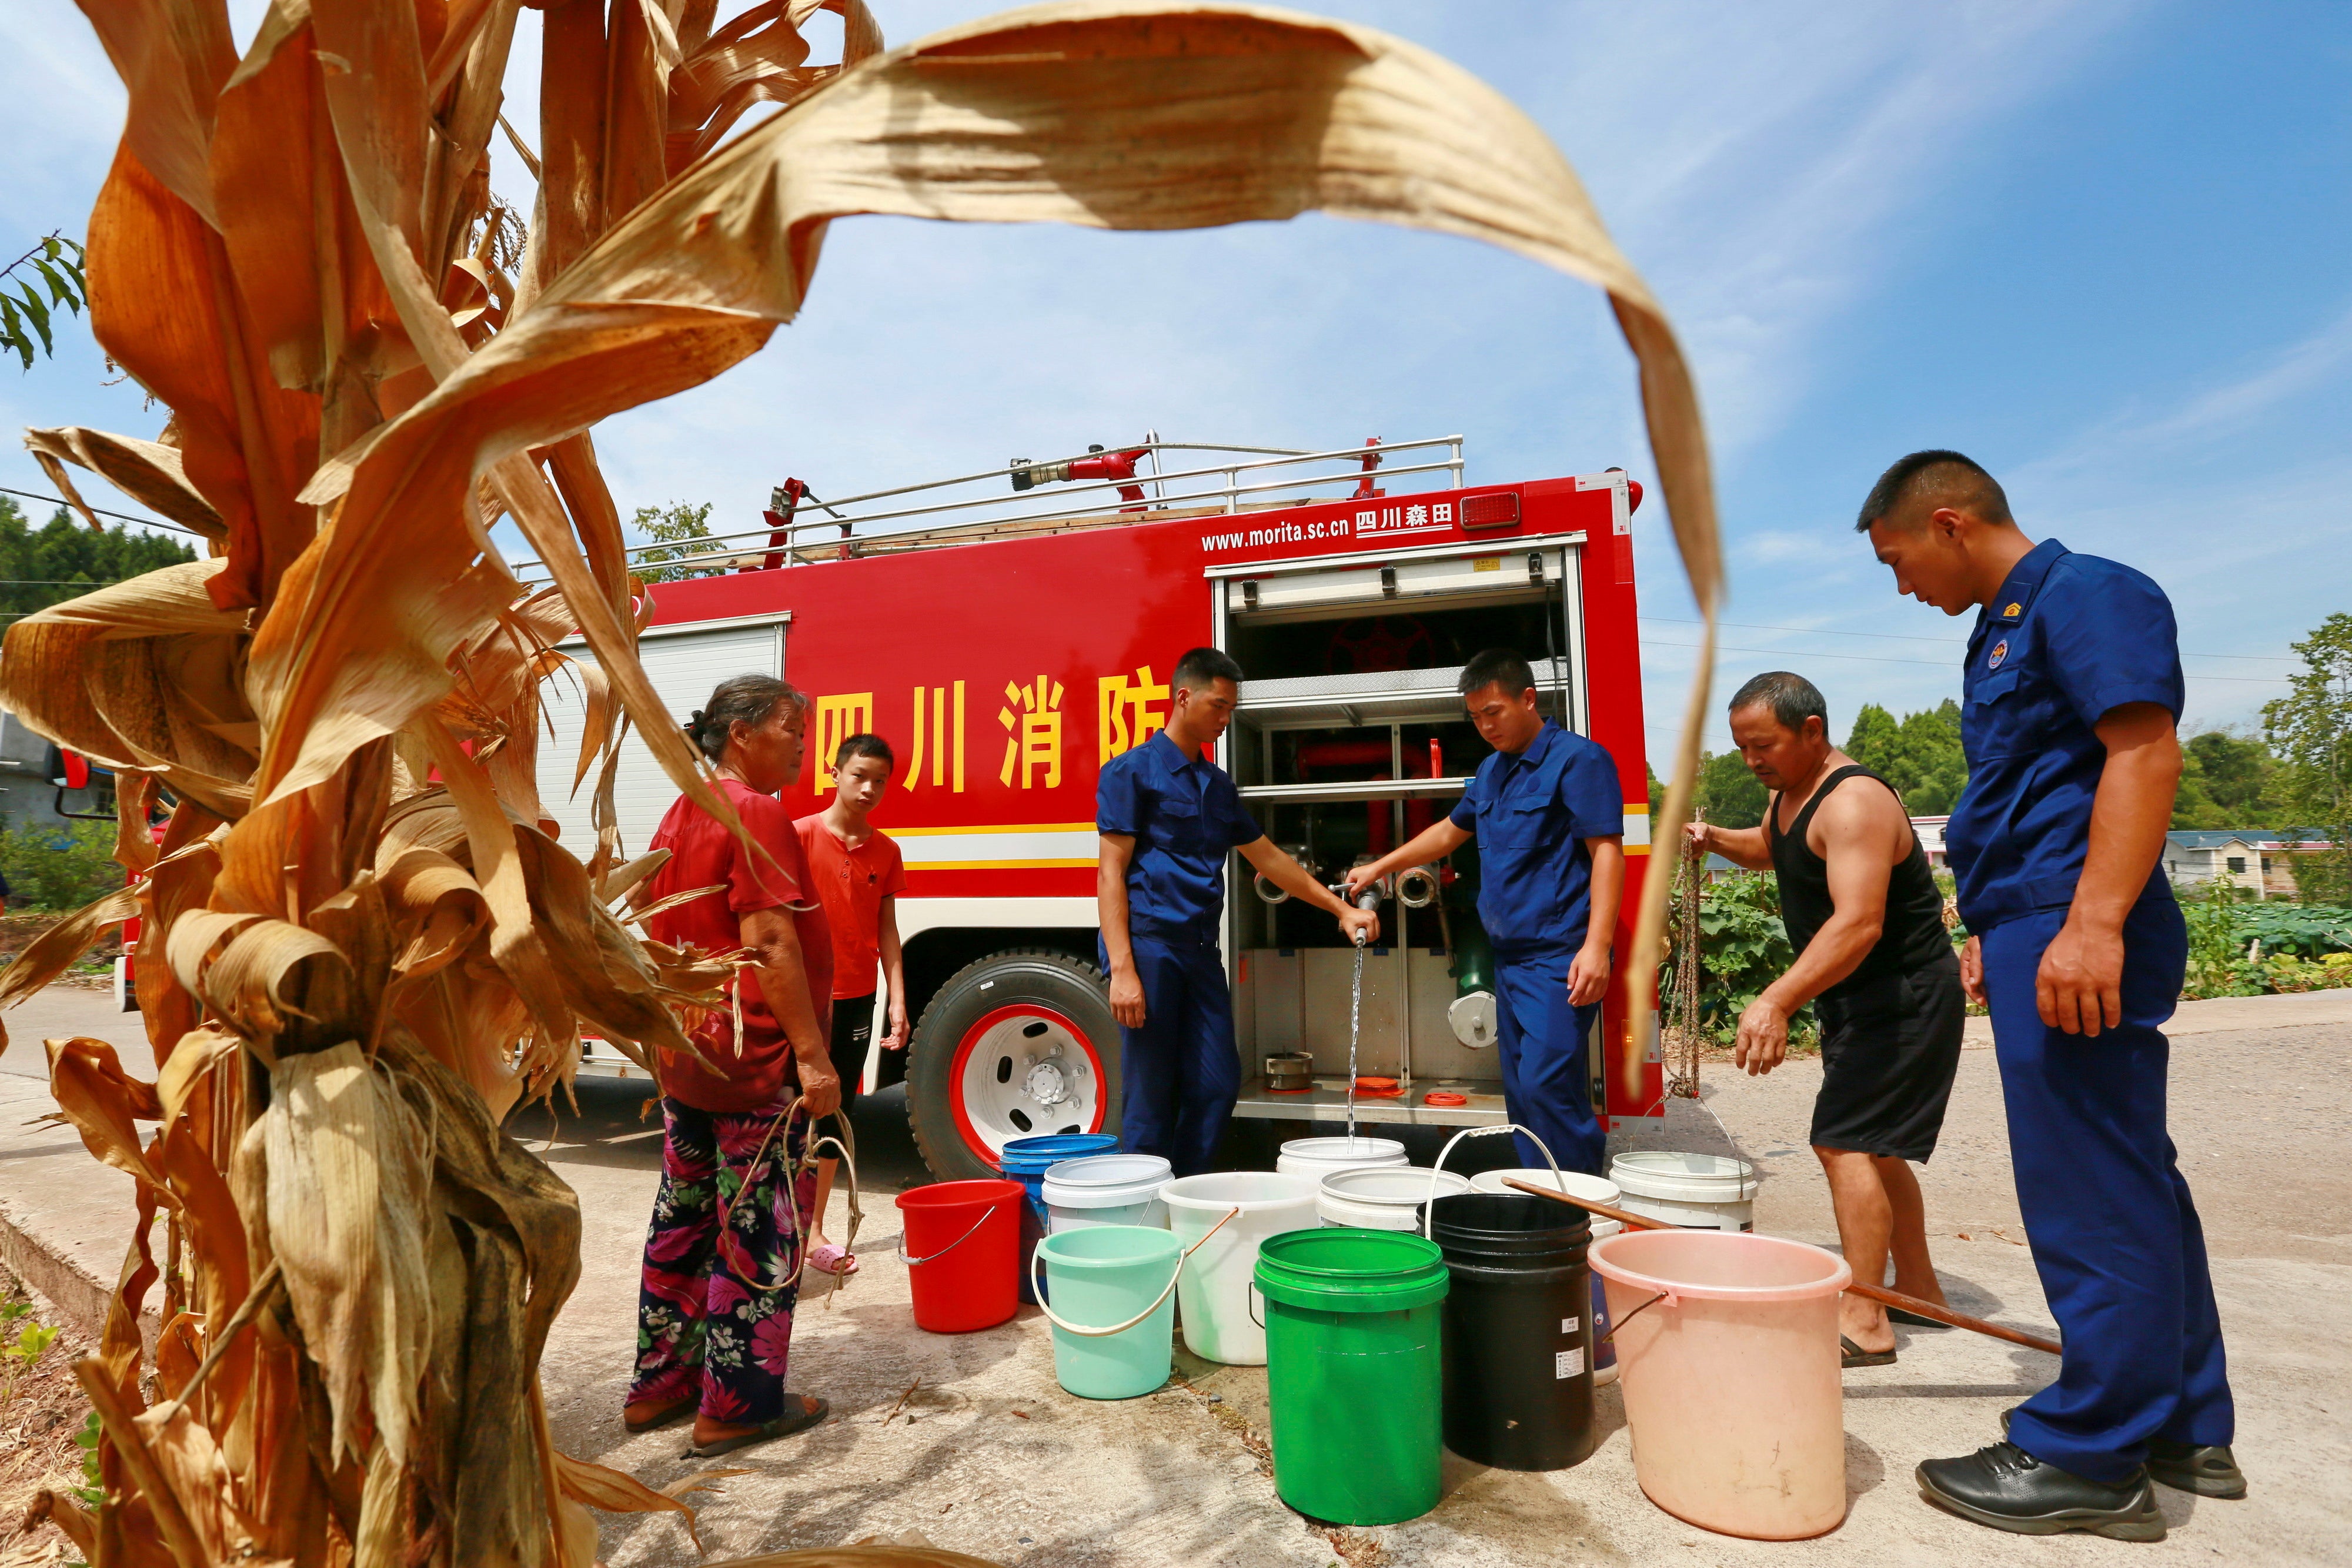 Villagers get water from a fire truck in Suining in Sichuan province on August 23. (Photo: Zhong Min/FCHNA, AP)